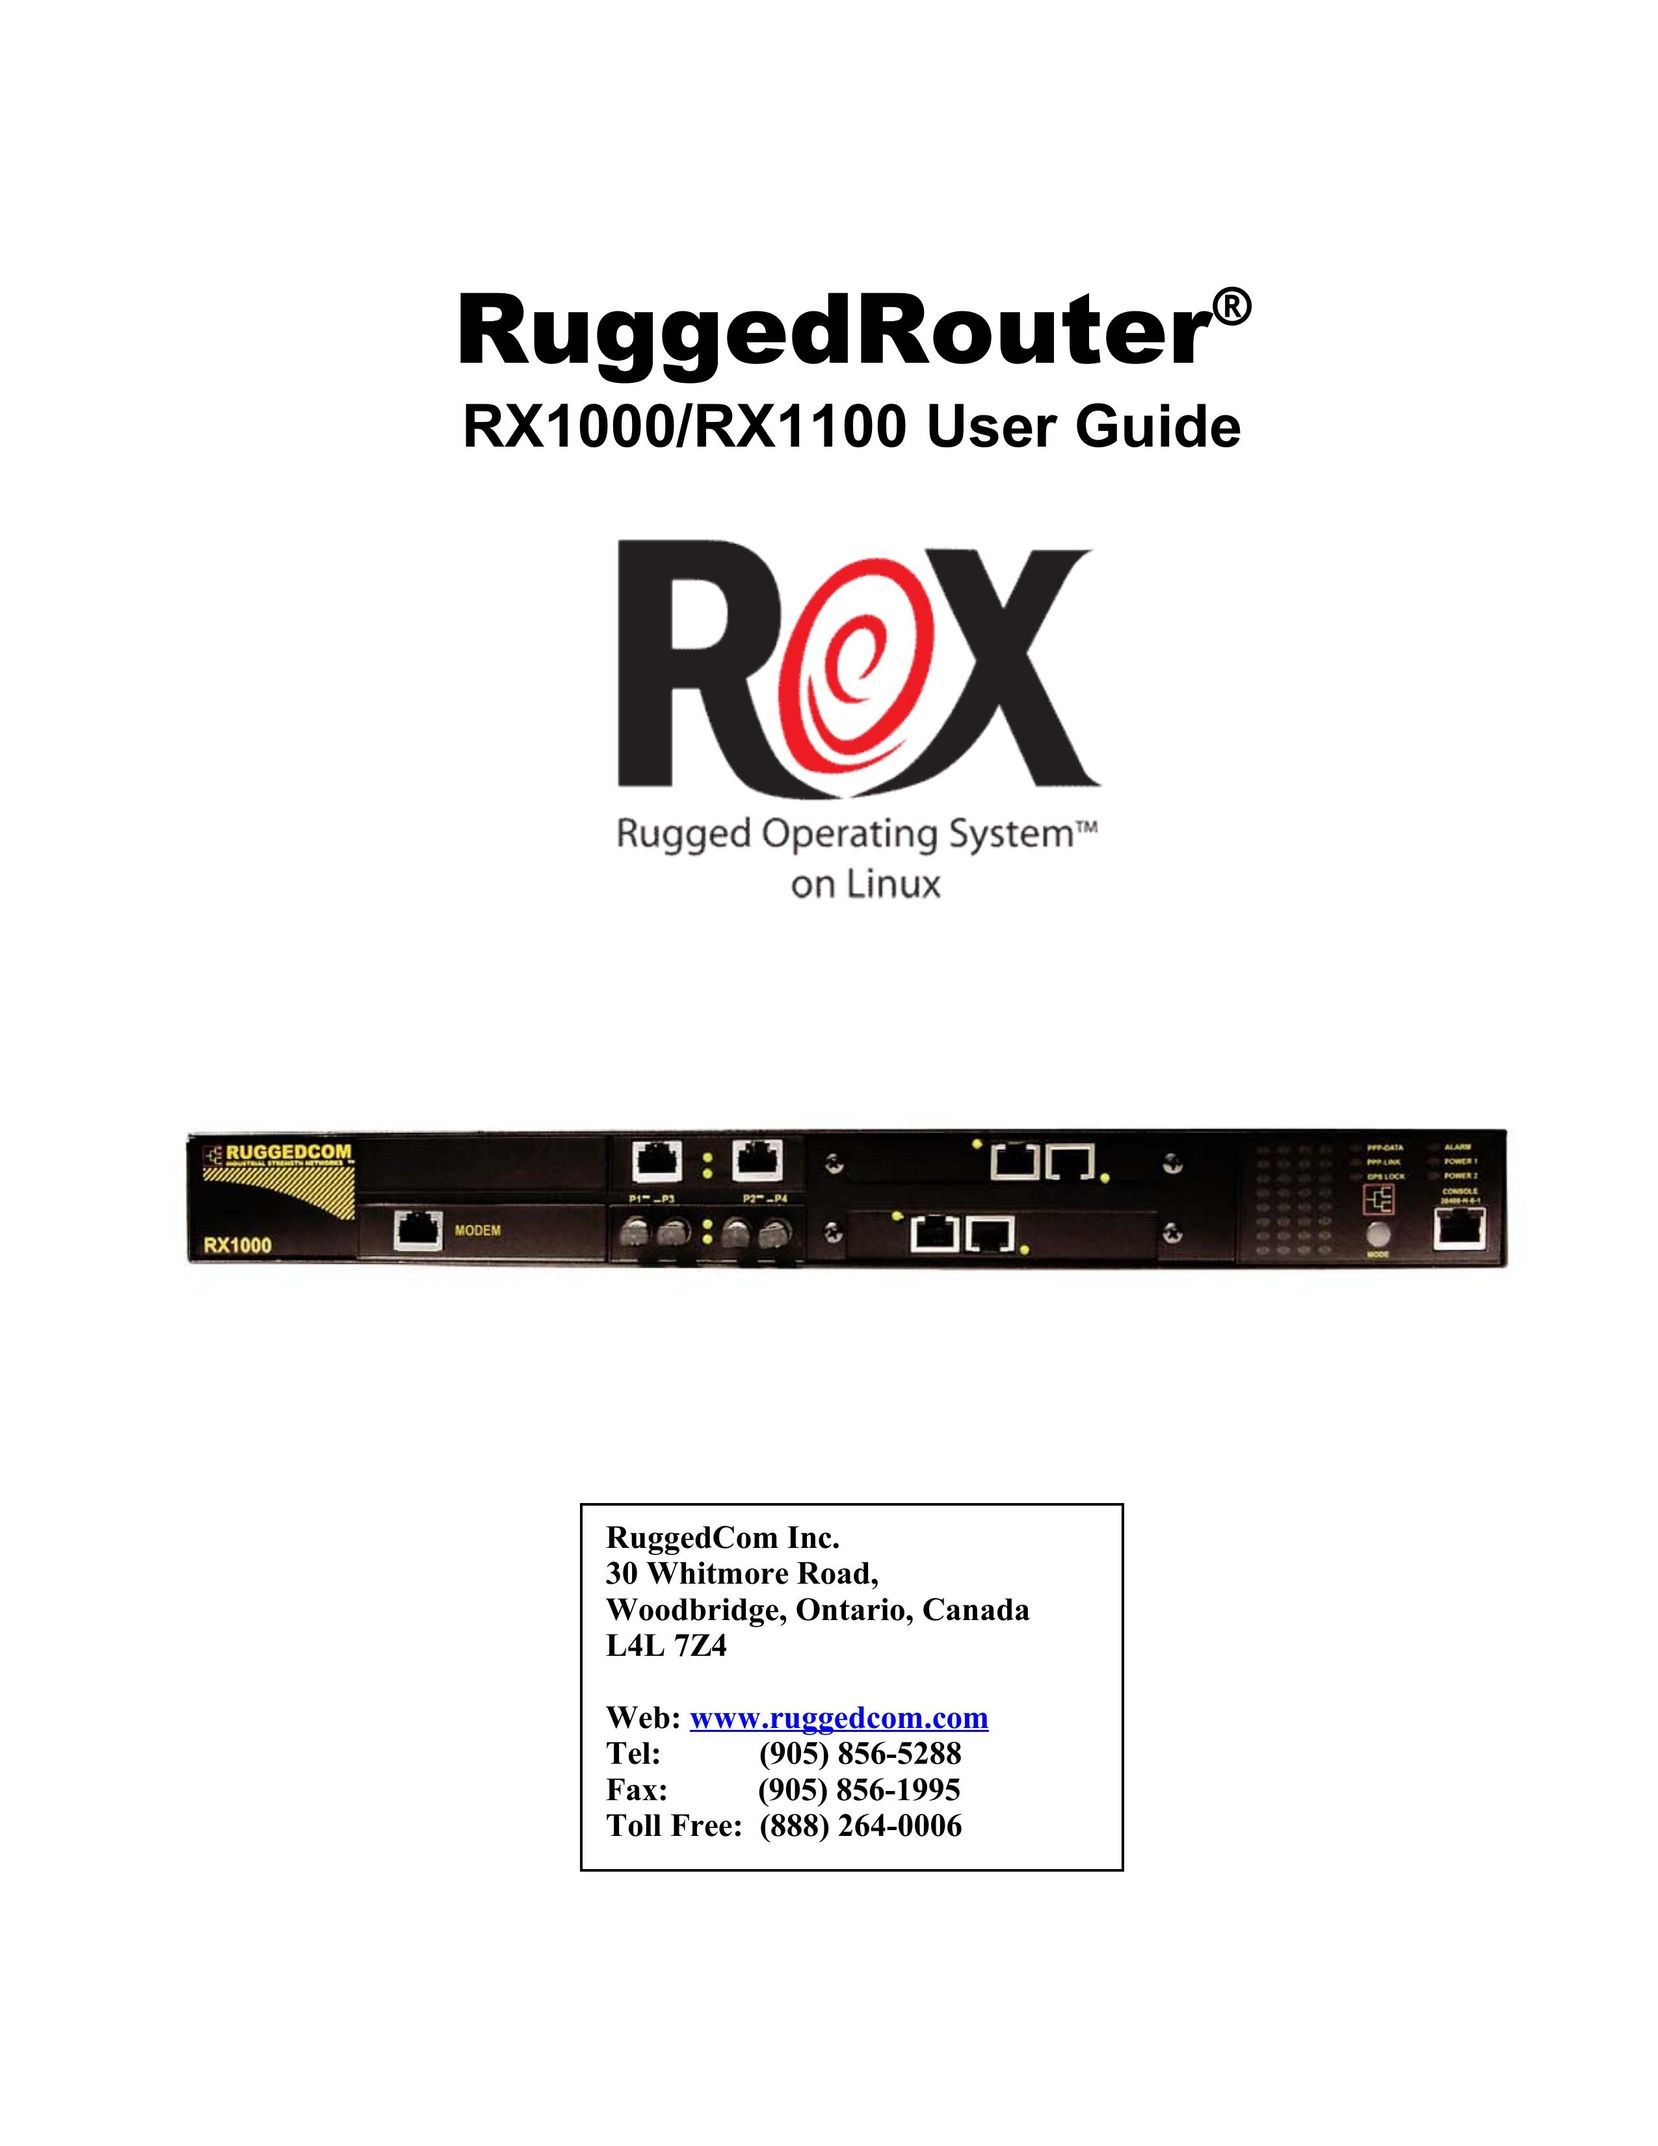 RuggedCom RX1000 Network Router User Manual